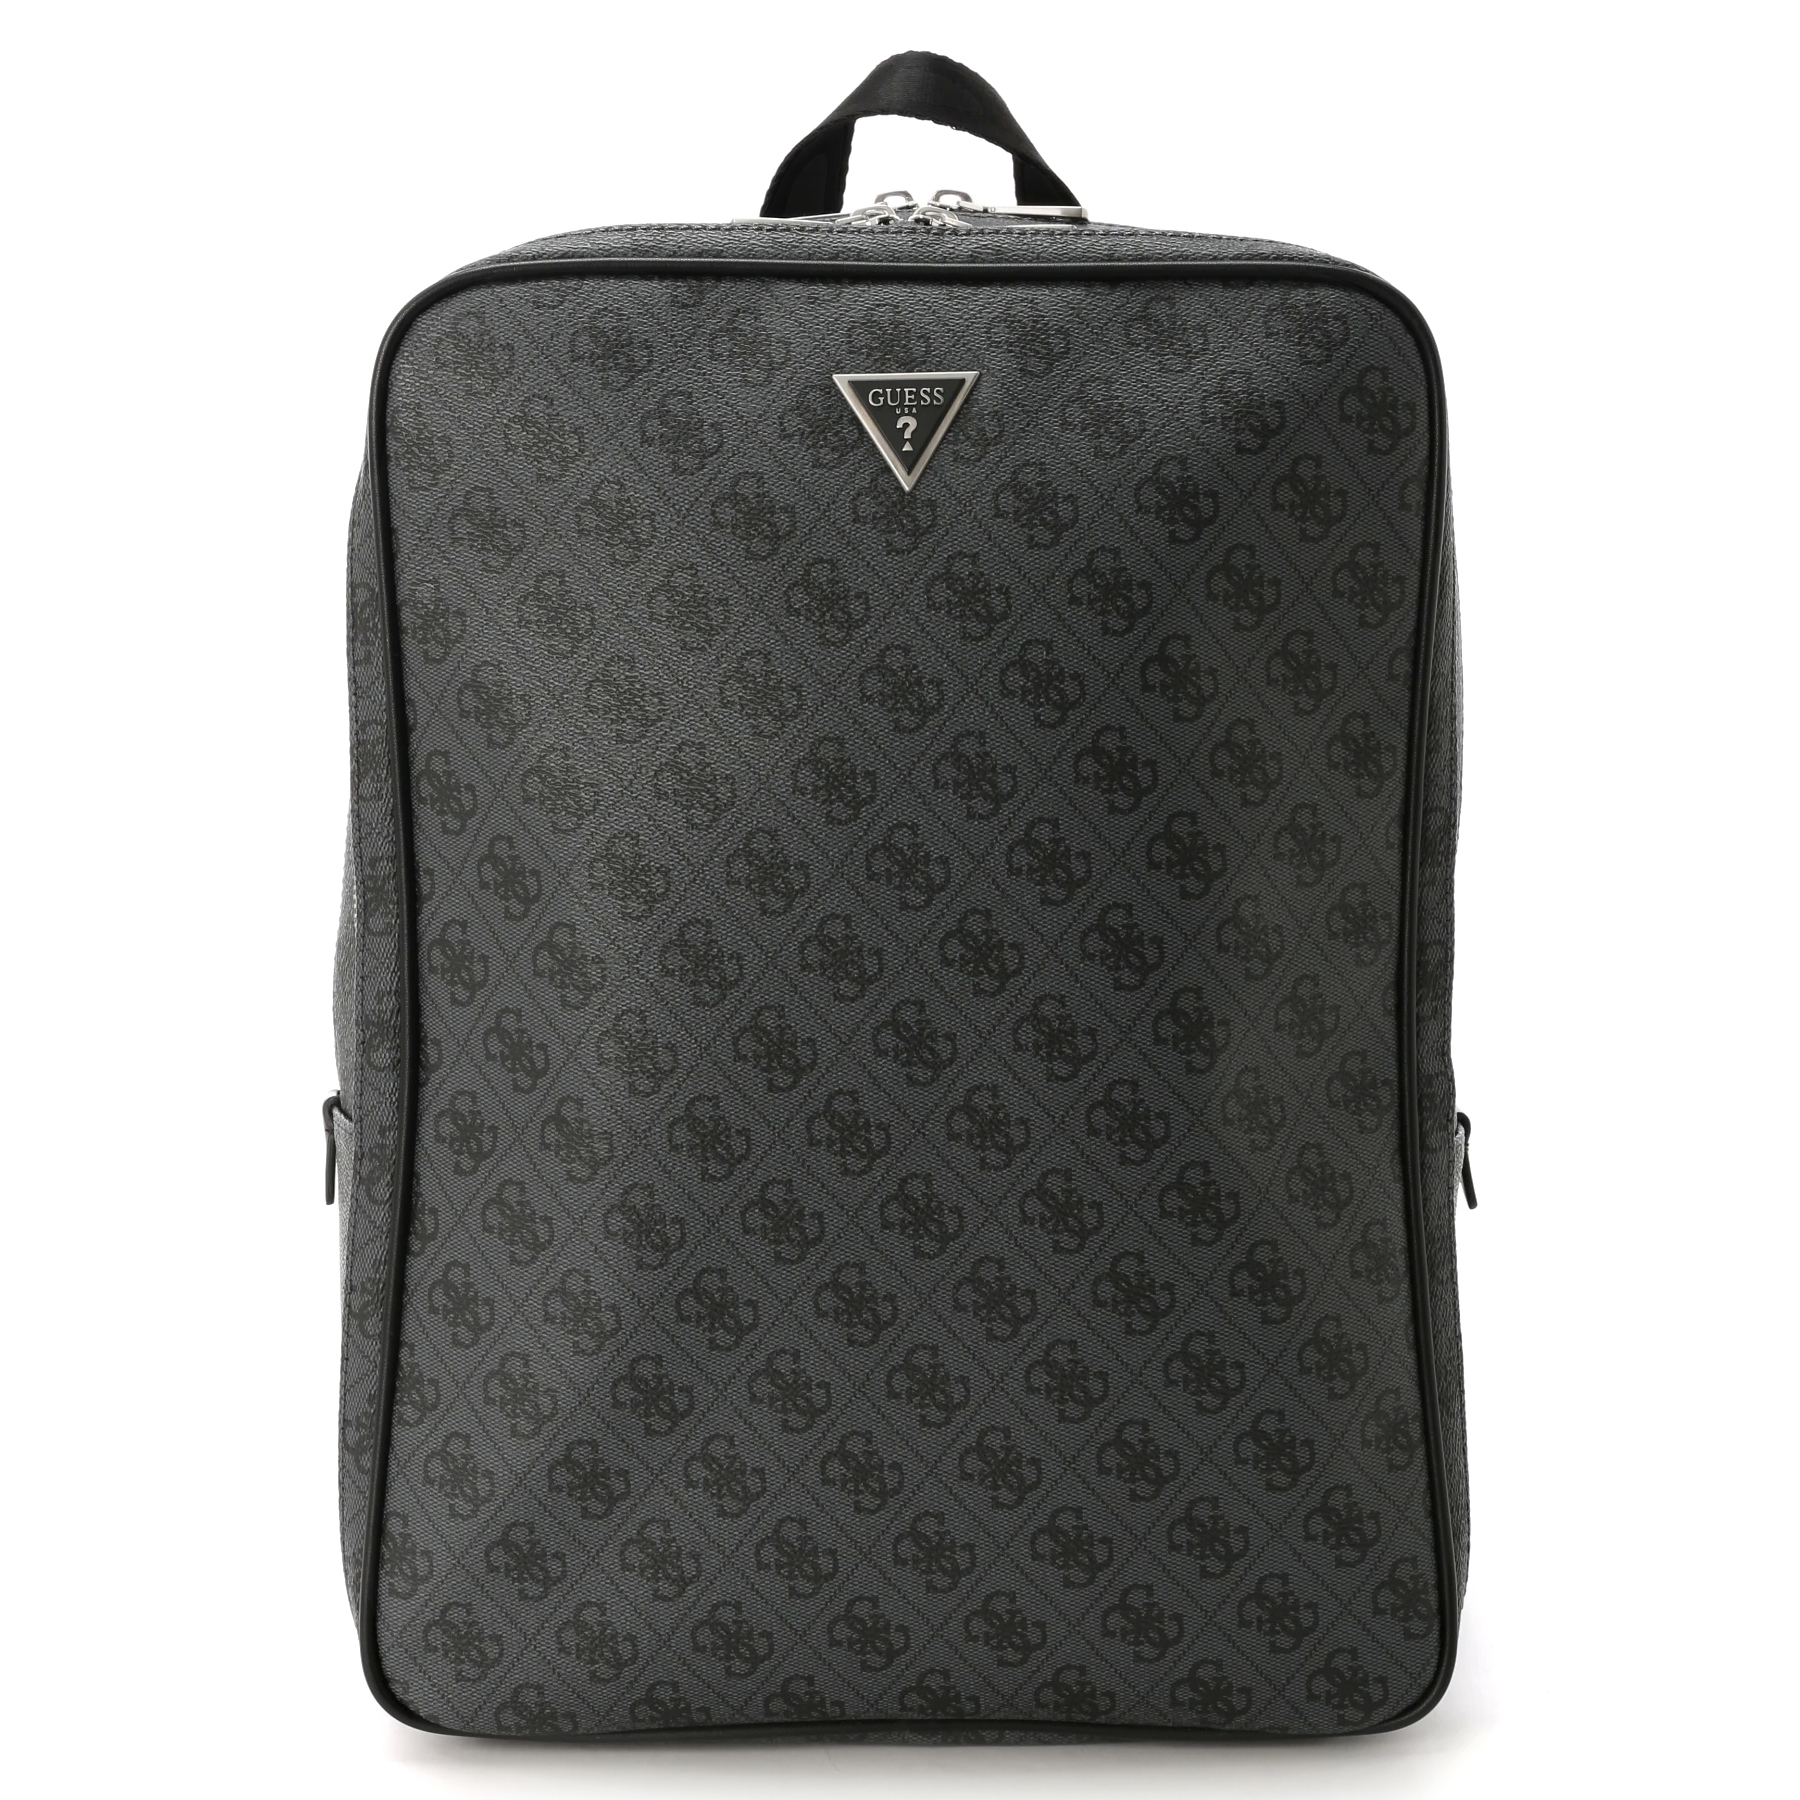 [GUESS] VEZZOLA Smart Flat Backpack[品番：GUEW0007569